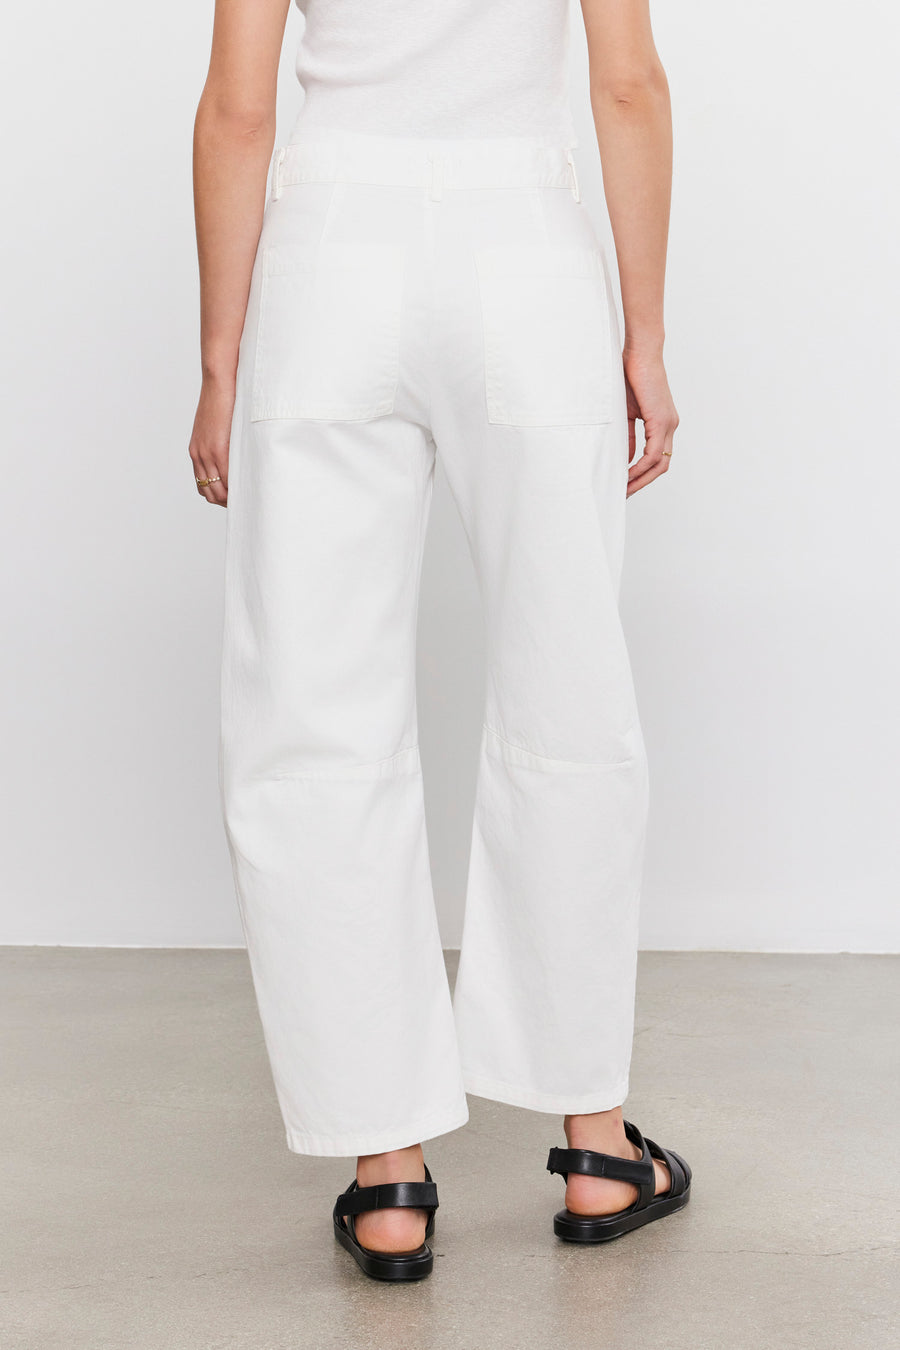 Brylie Twill Pant